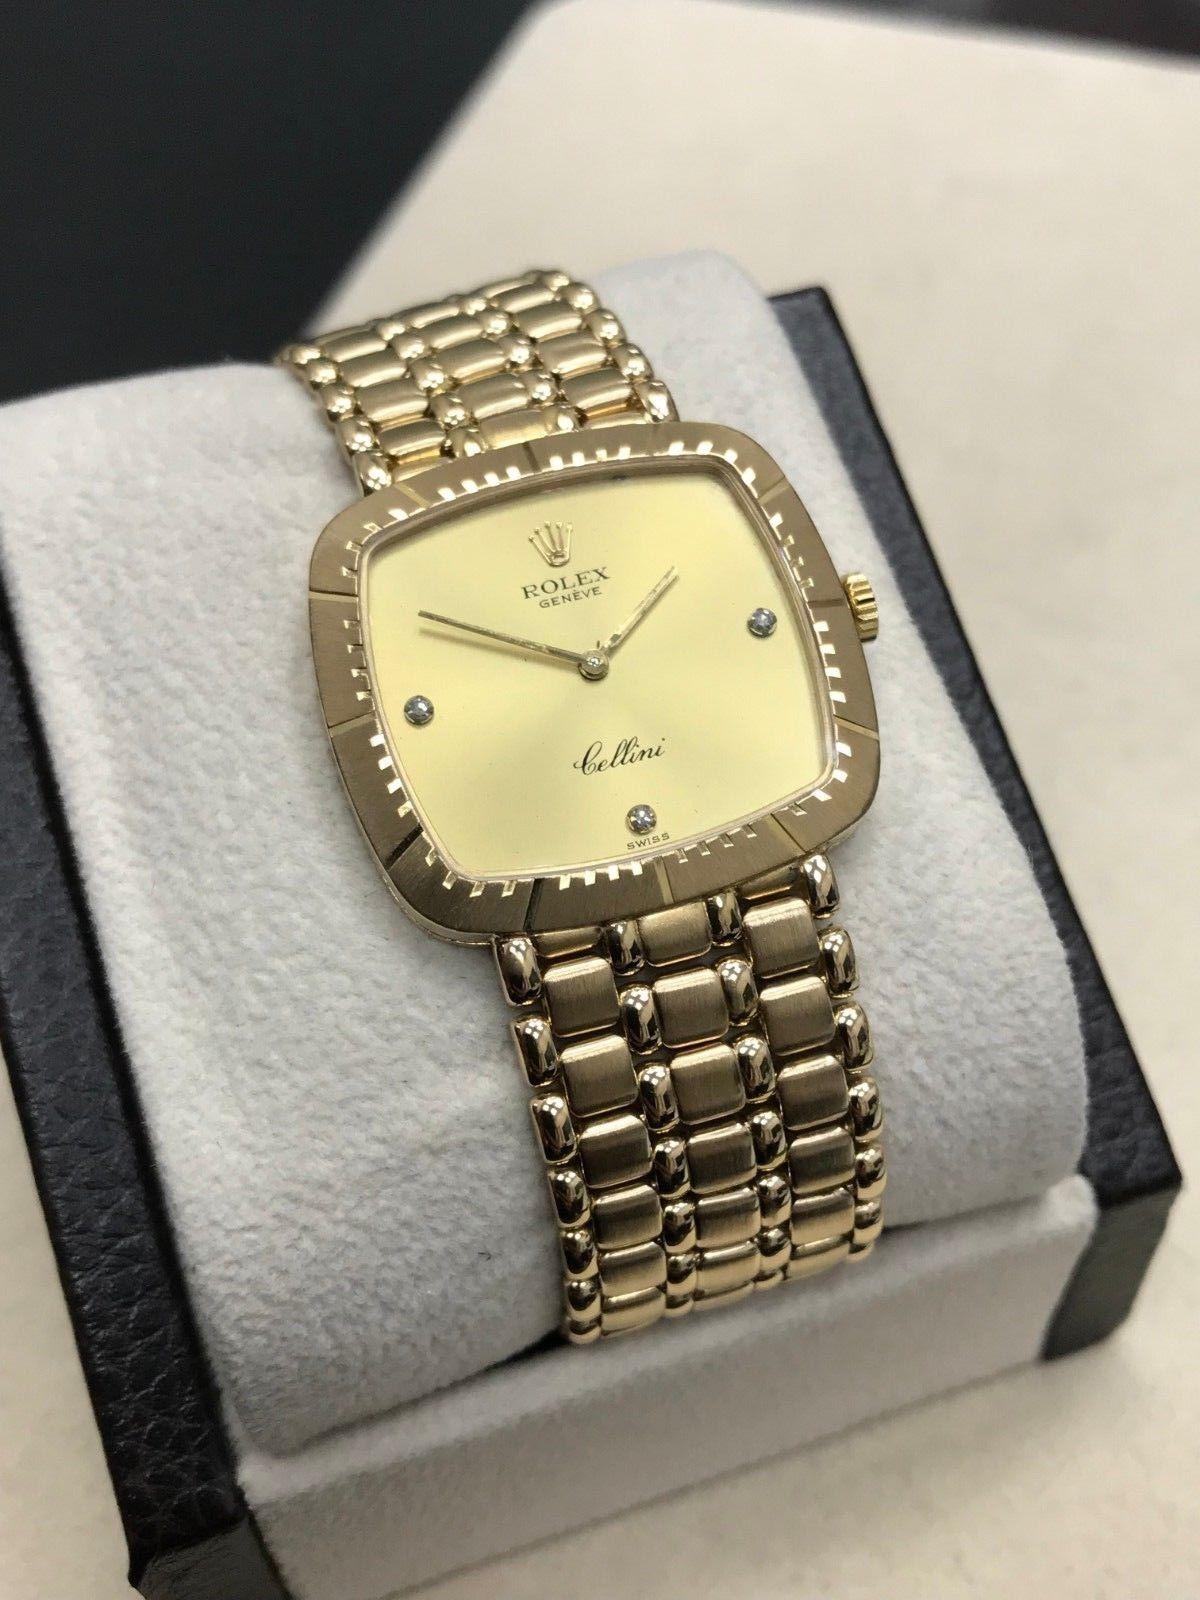 Style Number: 4084

Serial: 6932***

Model: 18K Yellow Gold

Case Material: 18K Yellow Gold

Band: 18K Yellow Gold

Bezel: 18K Yellow Gold

Dial: Champagne Diamond Dial 

Face: Sapphire Crystal 

Case Size: 30 x 28mm

Includes: 

-Elegant Watch